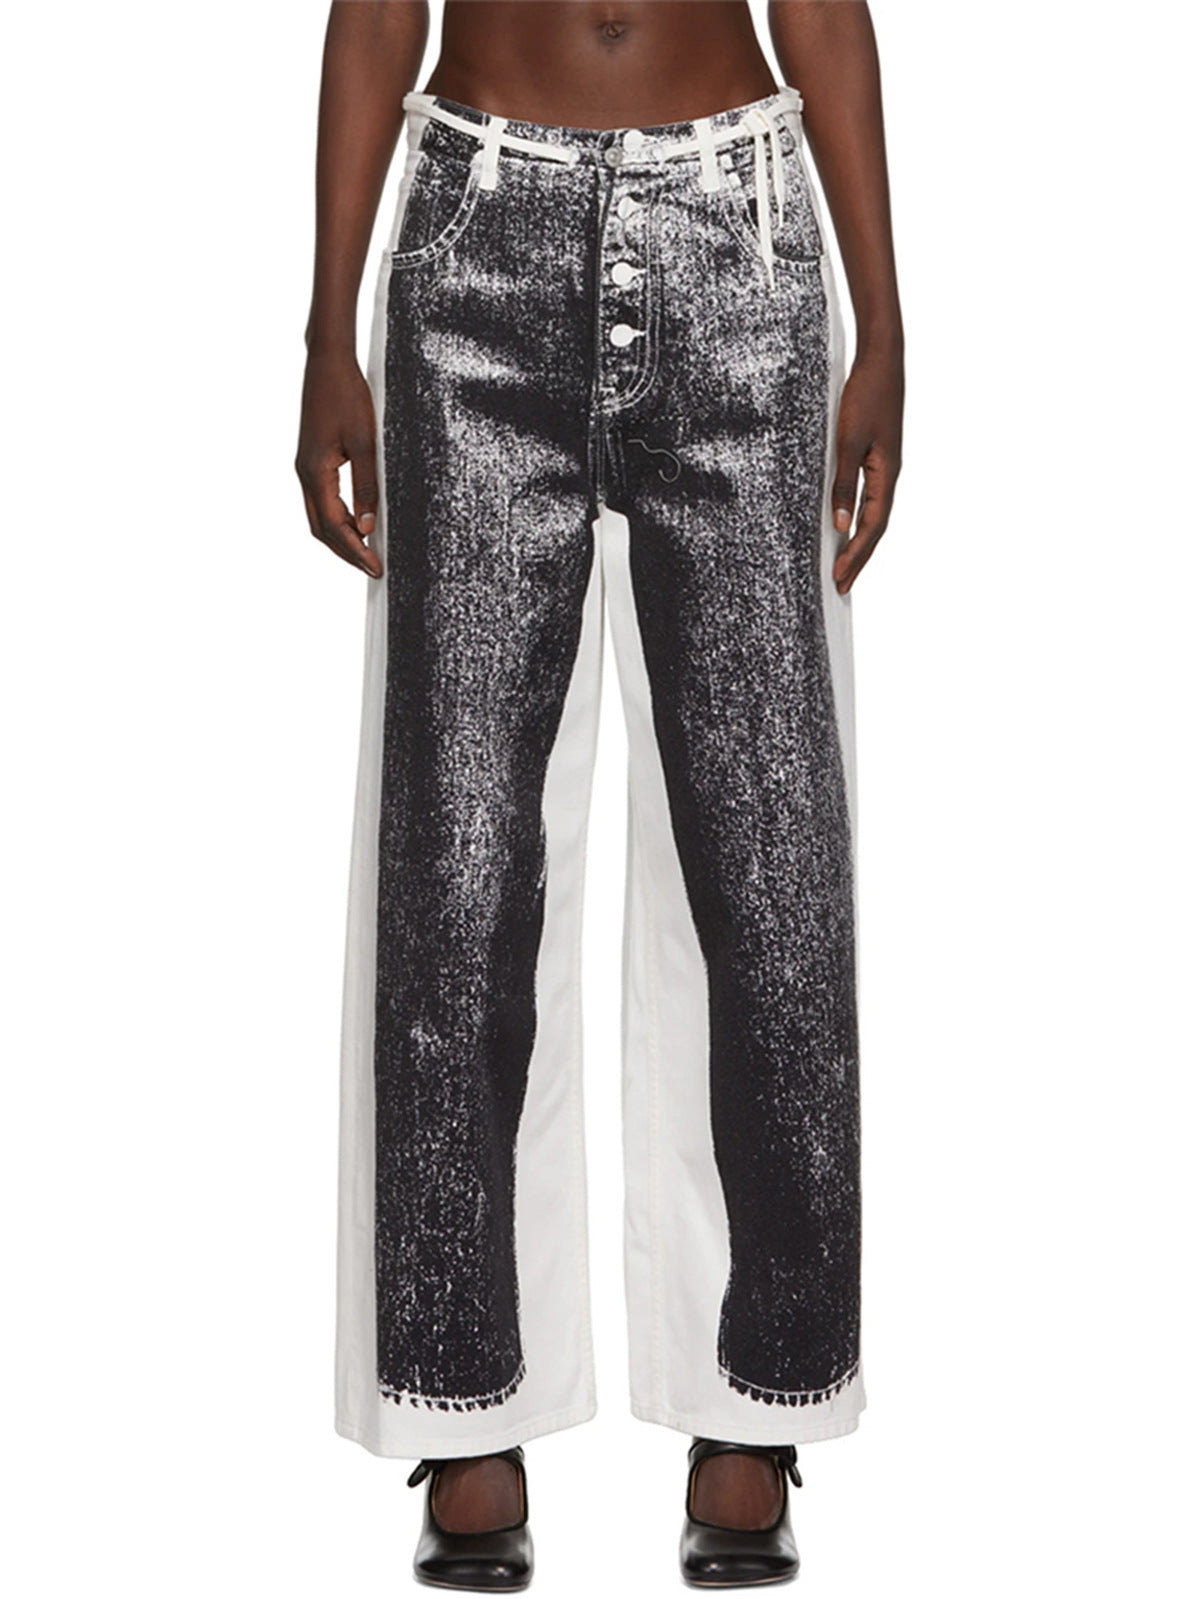 In Vogue Fashionable 3-Dimensional High Waisted Printed Jeans